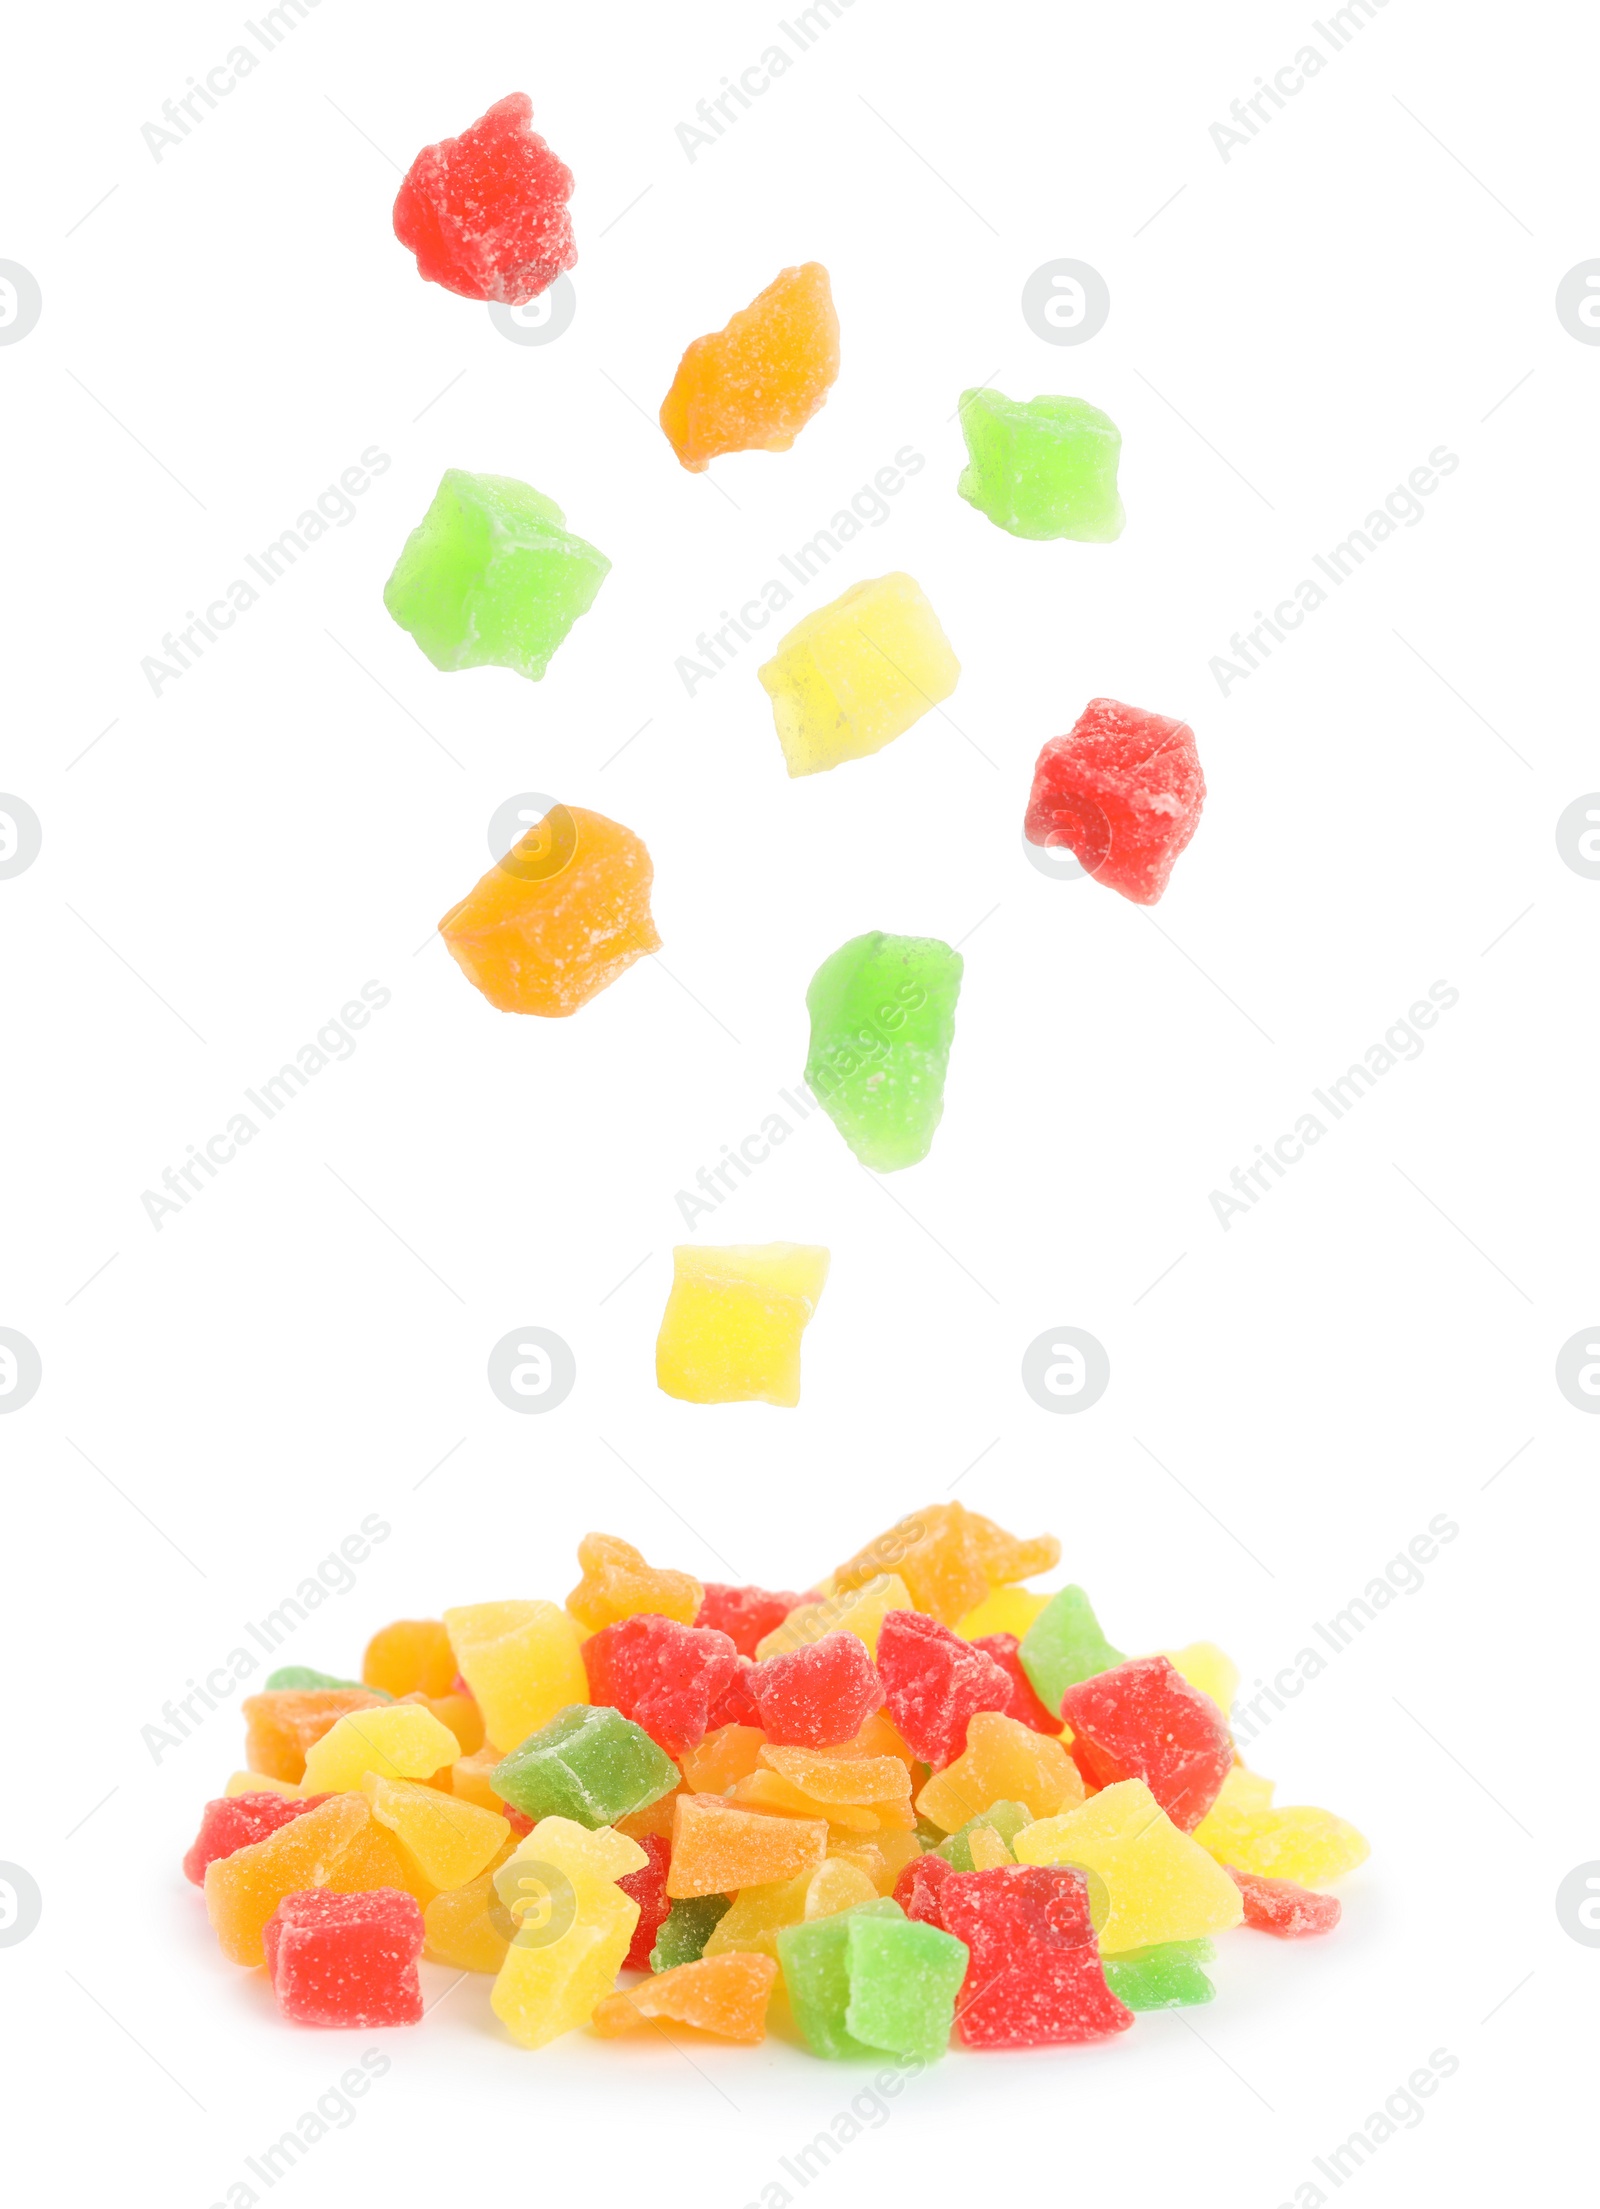 Image of Tasty pieces of candied fruits falling into pile on white background 